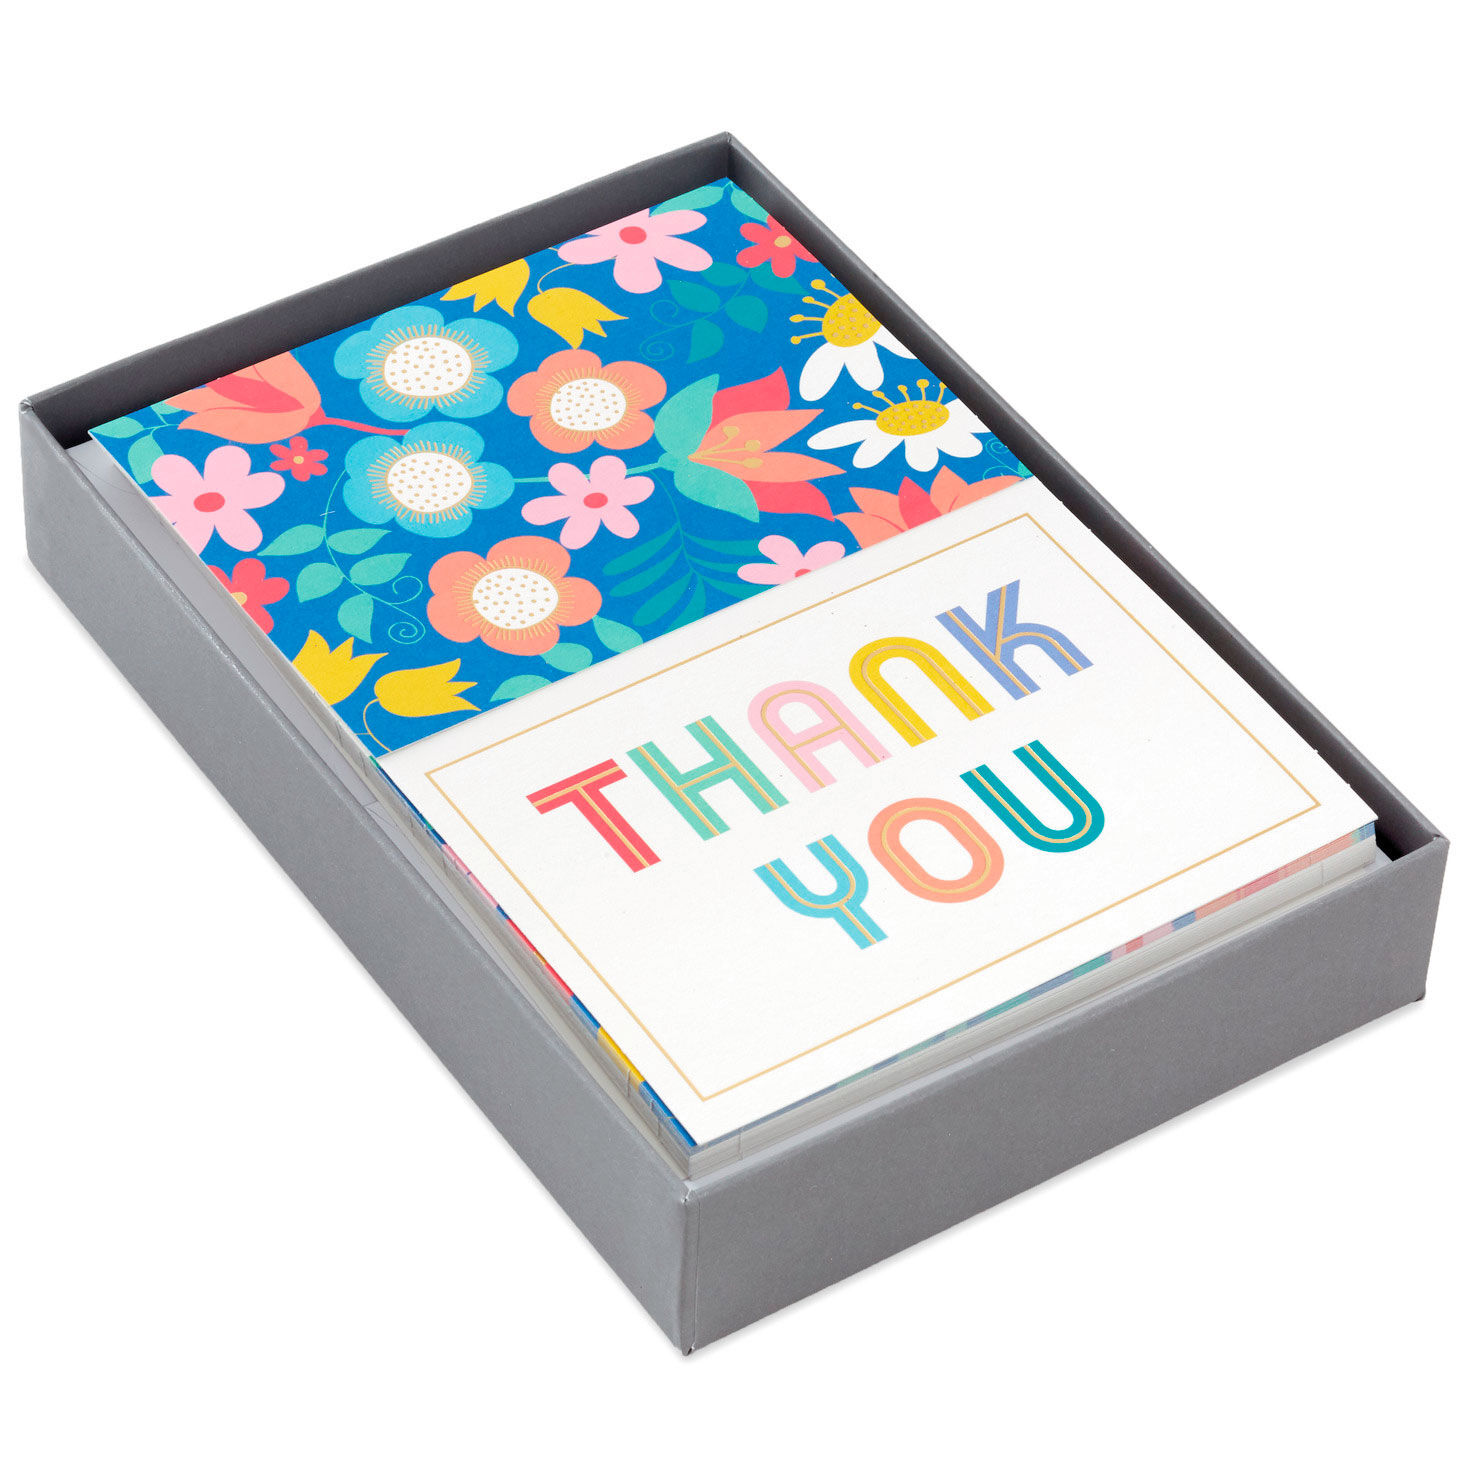 Flowers and Dots, 50 Blank Cards or Thank You Cards with Envelopes Hallmark Blank Note Cards